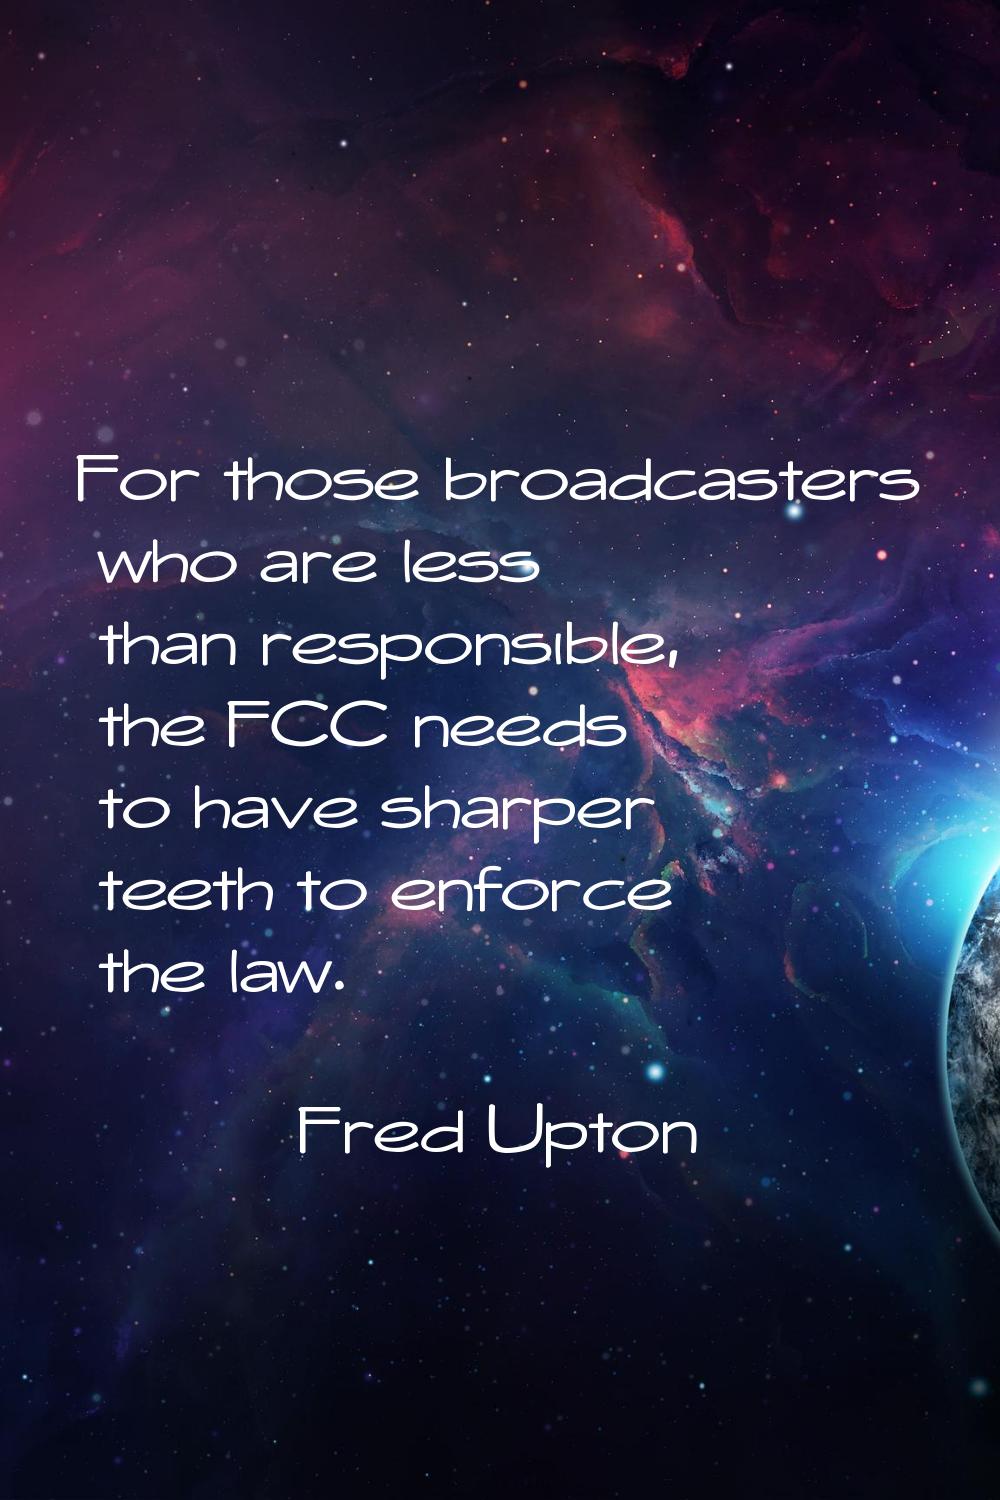 For those broadcasters who are less than responsible, the FCC needs to have sharper teeth to enforc